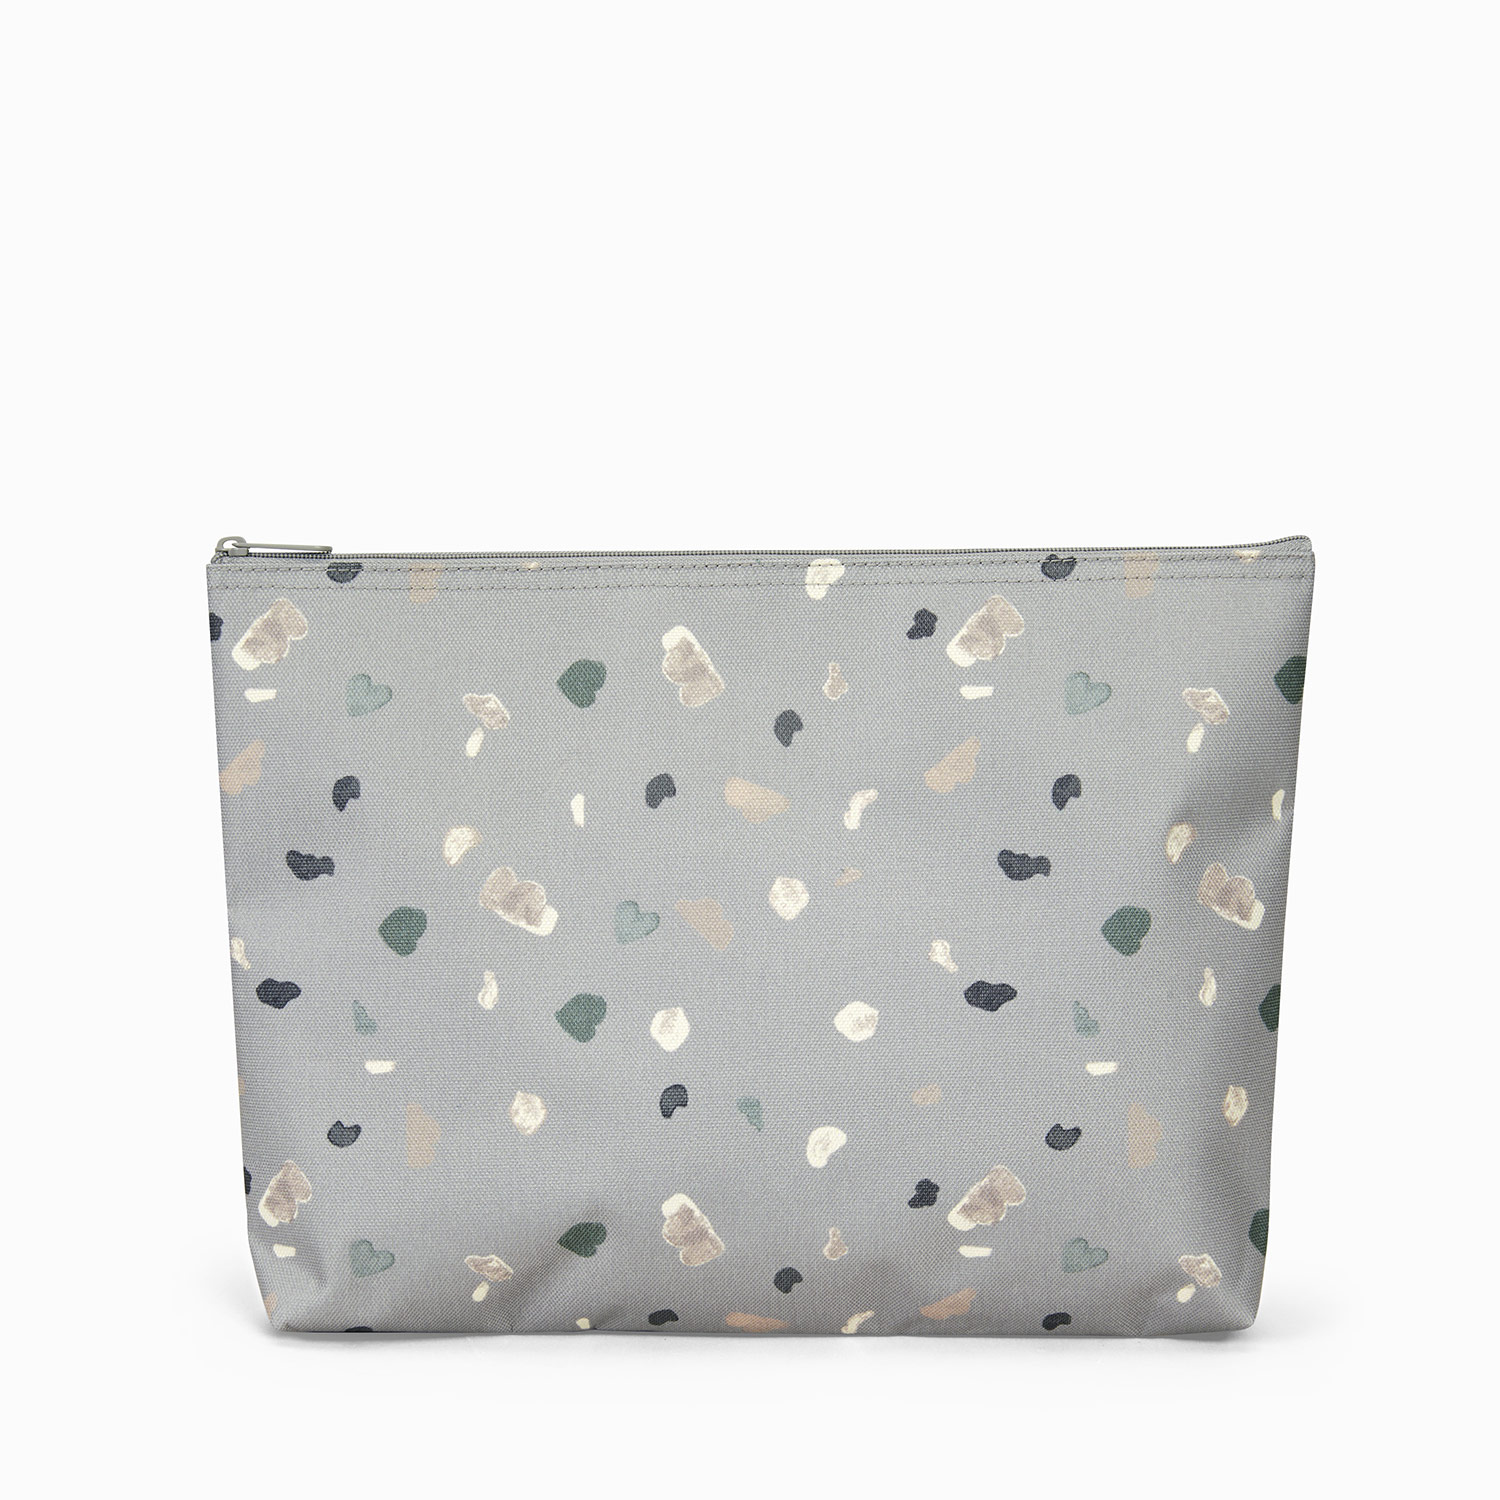 Cholet Zipper Pouch - You just saved $35 in this limited time offer!